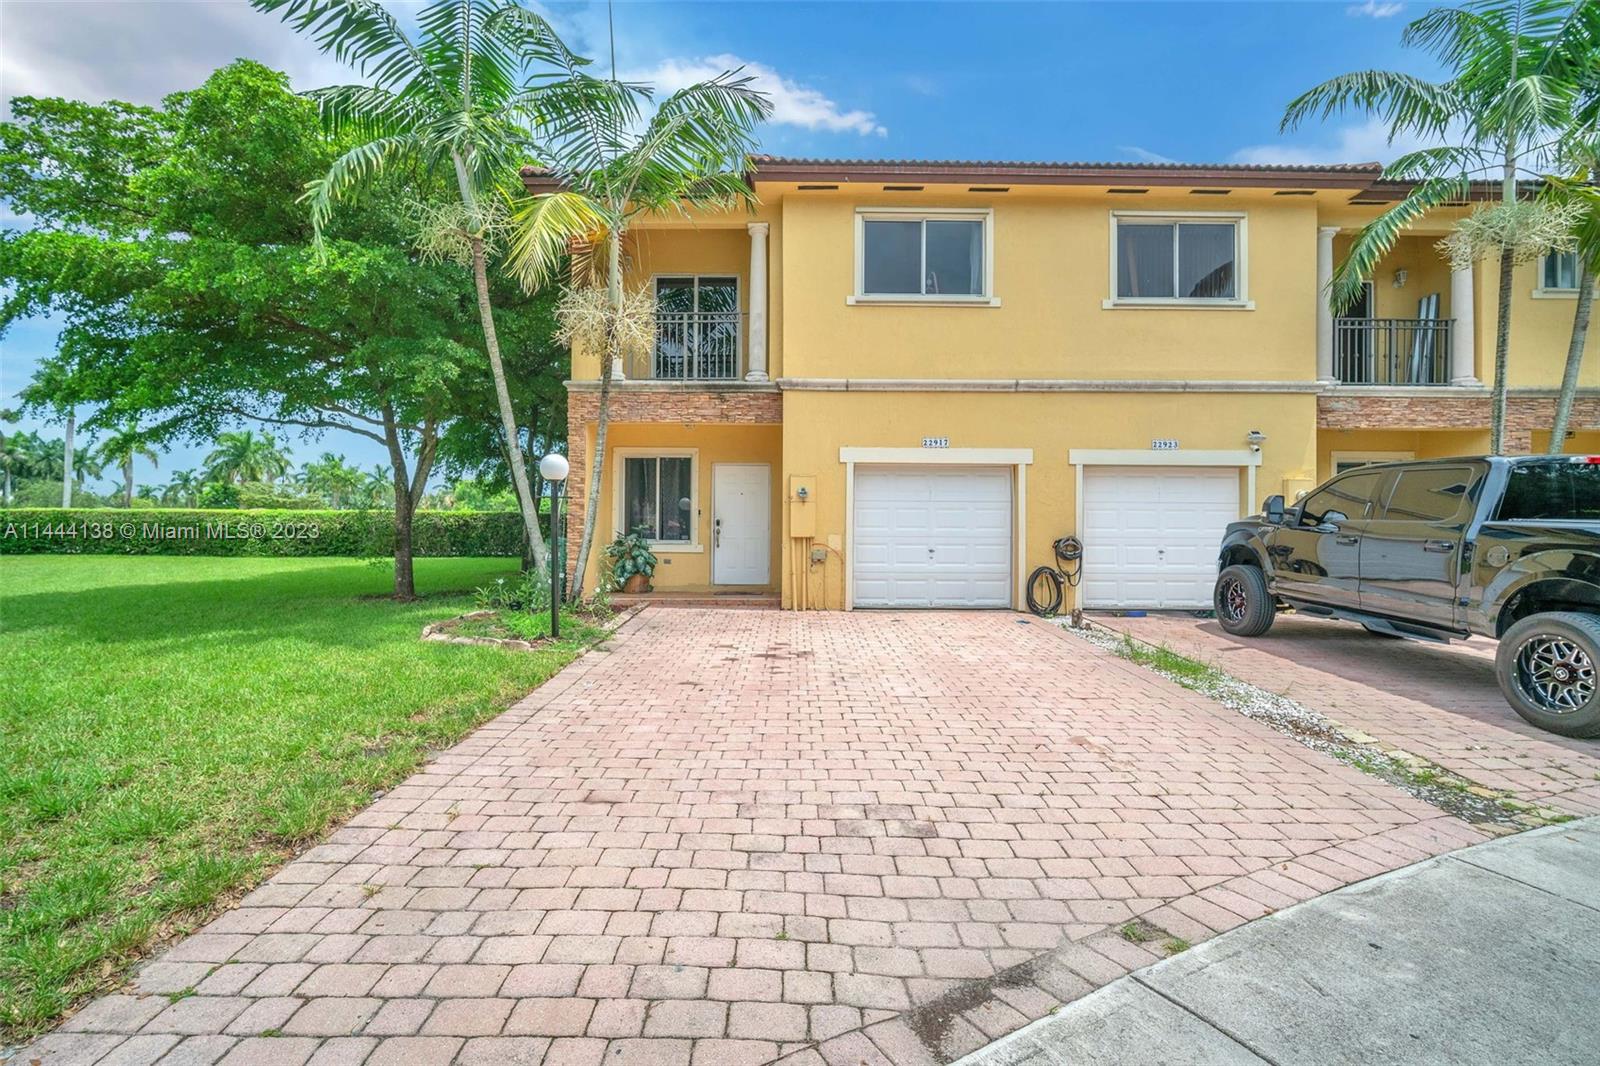 Photo 1 of 22917 SW 112th Ct in Miami - MLS A11444138